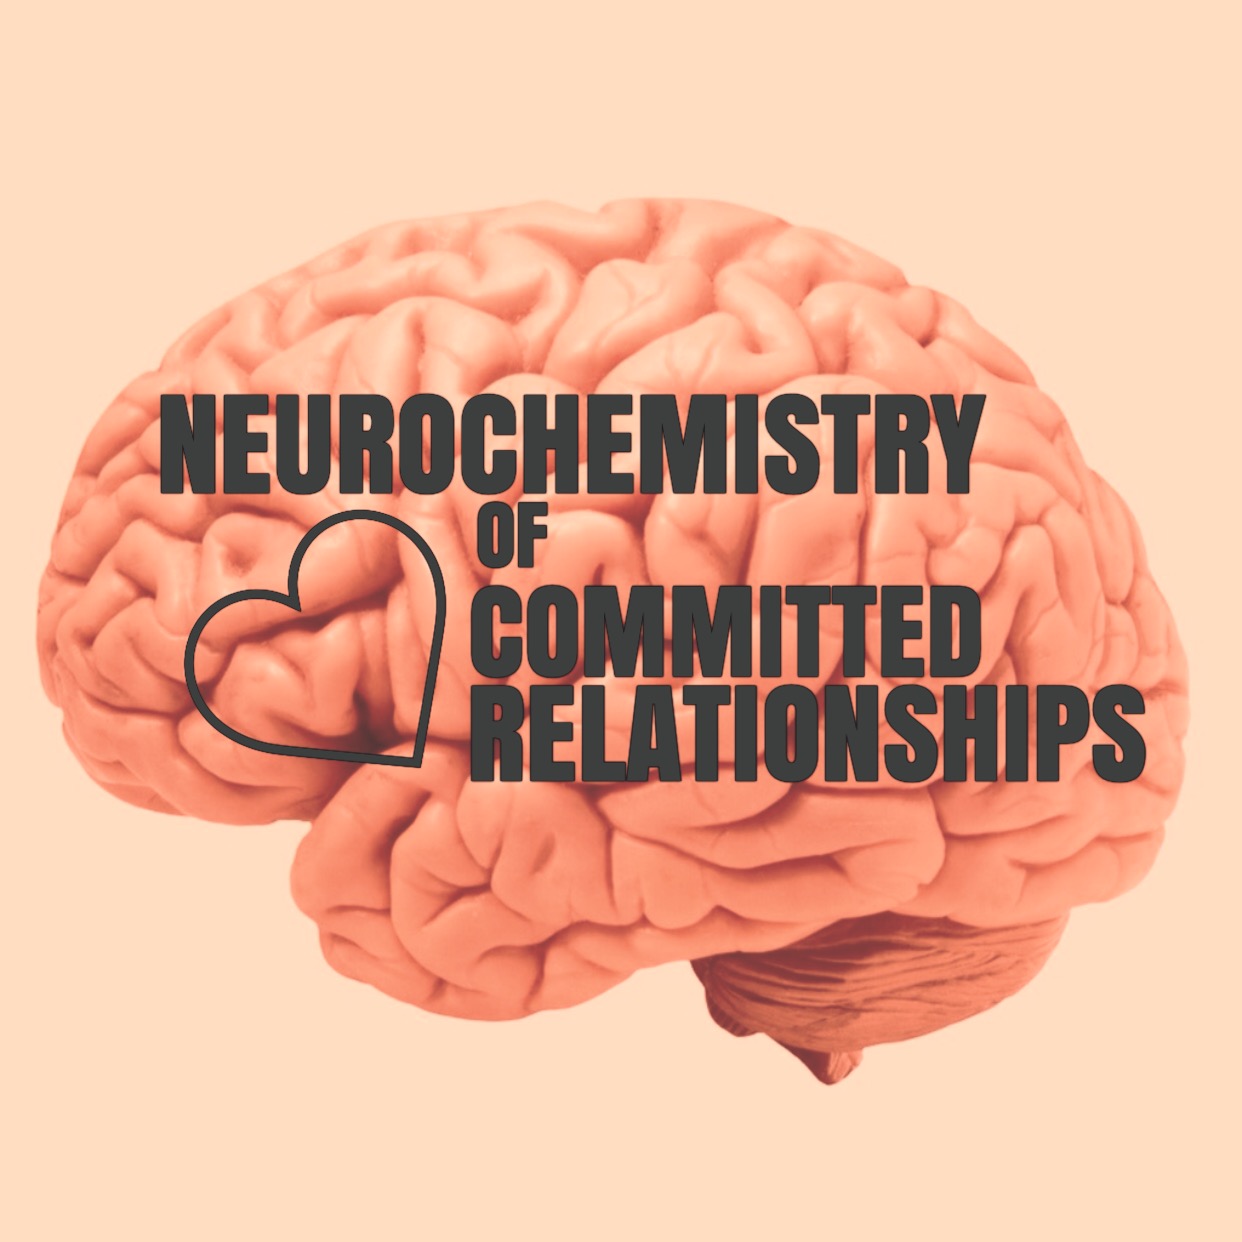 Neurochemistry of Committed Relationships